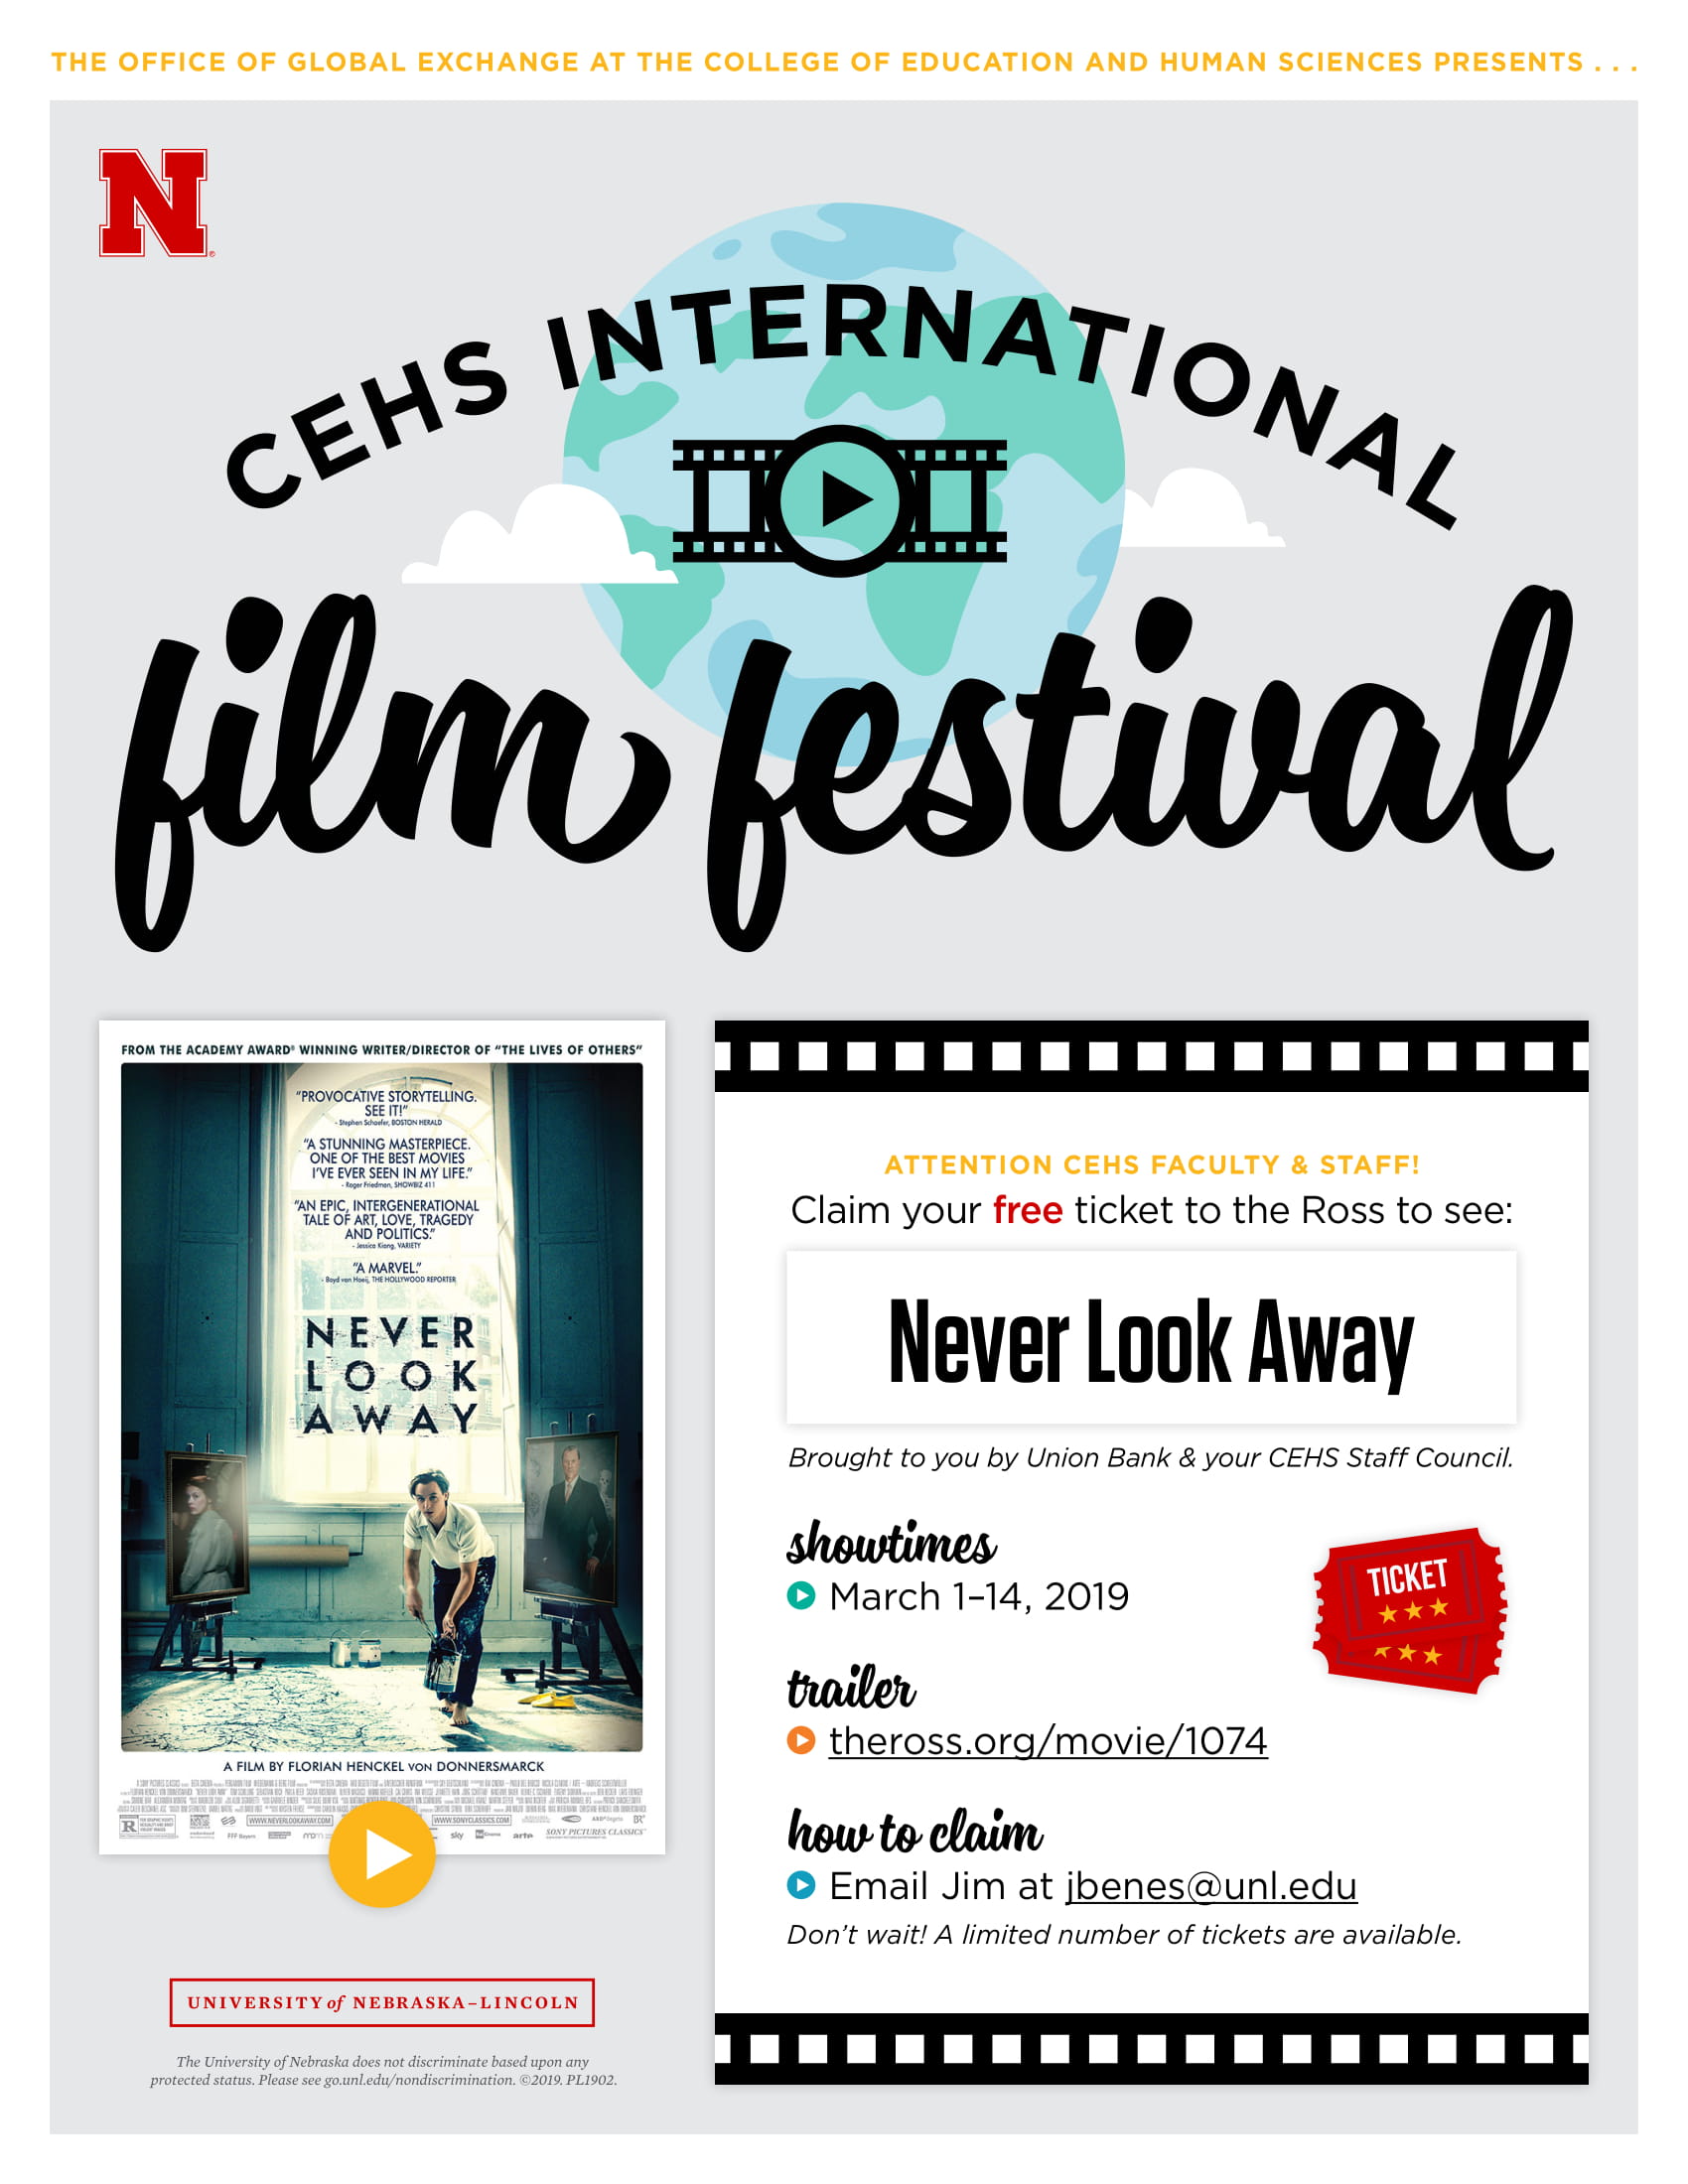 The CEHS International Film Festival continues March 1-14 with "Never Look Away." 